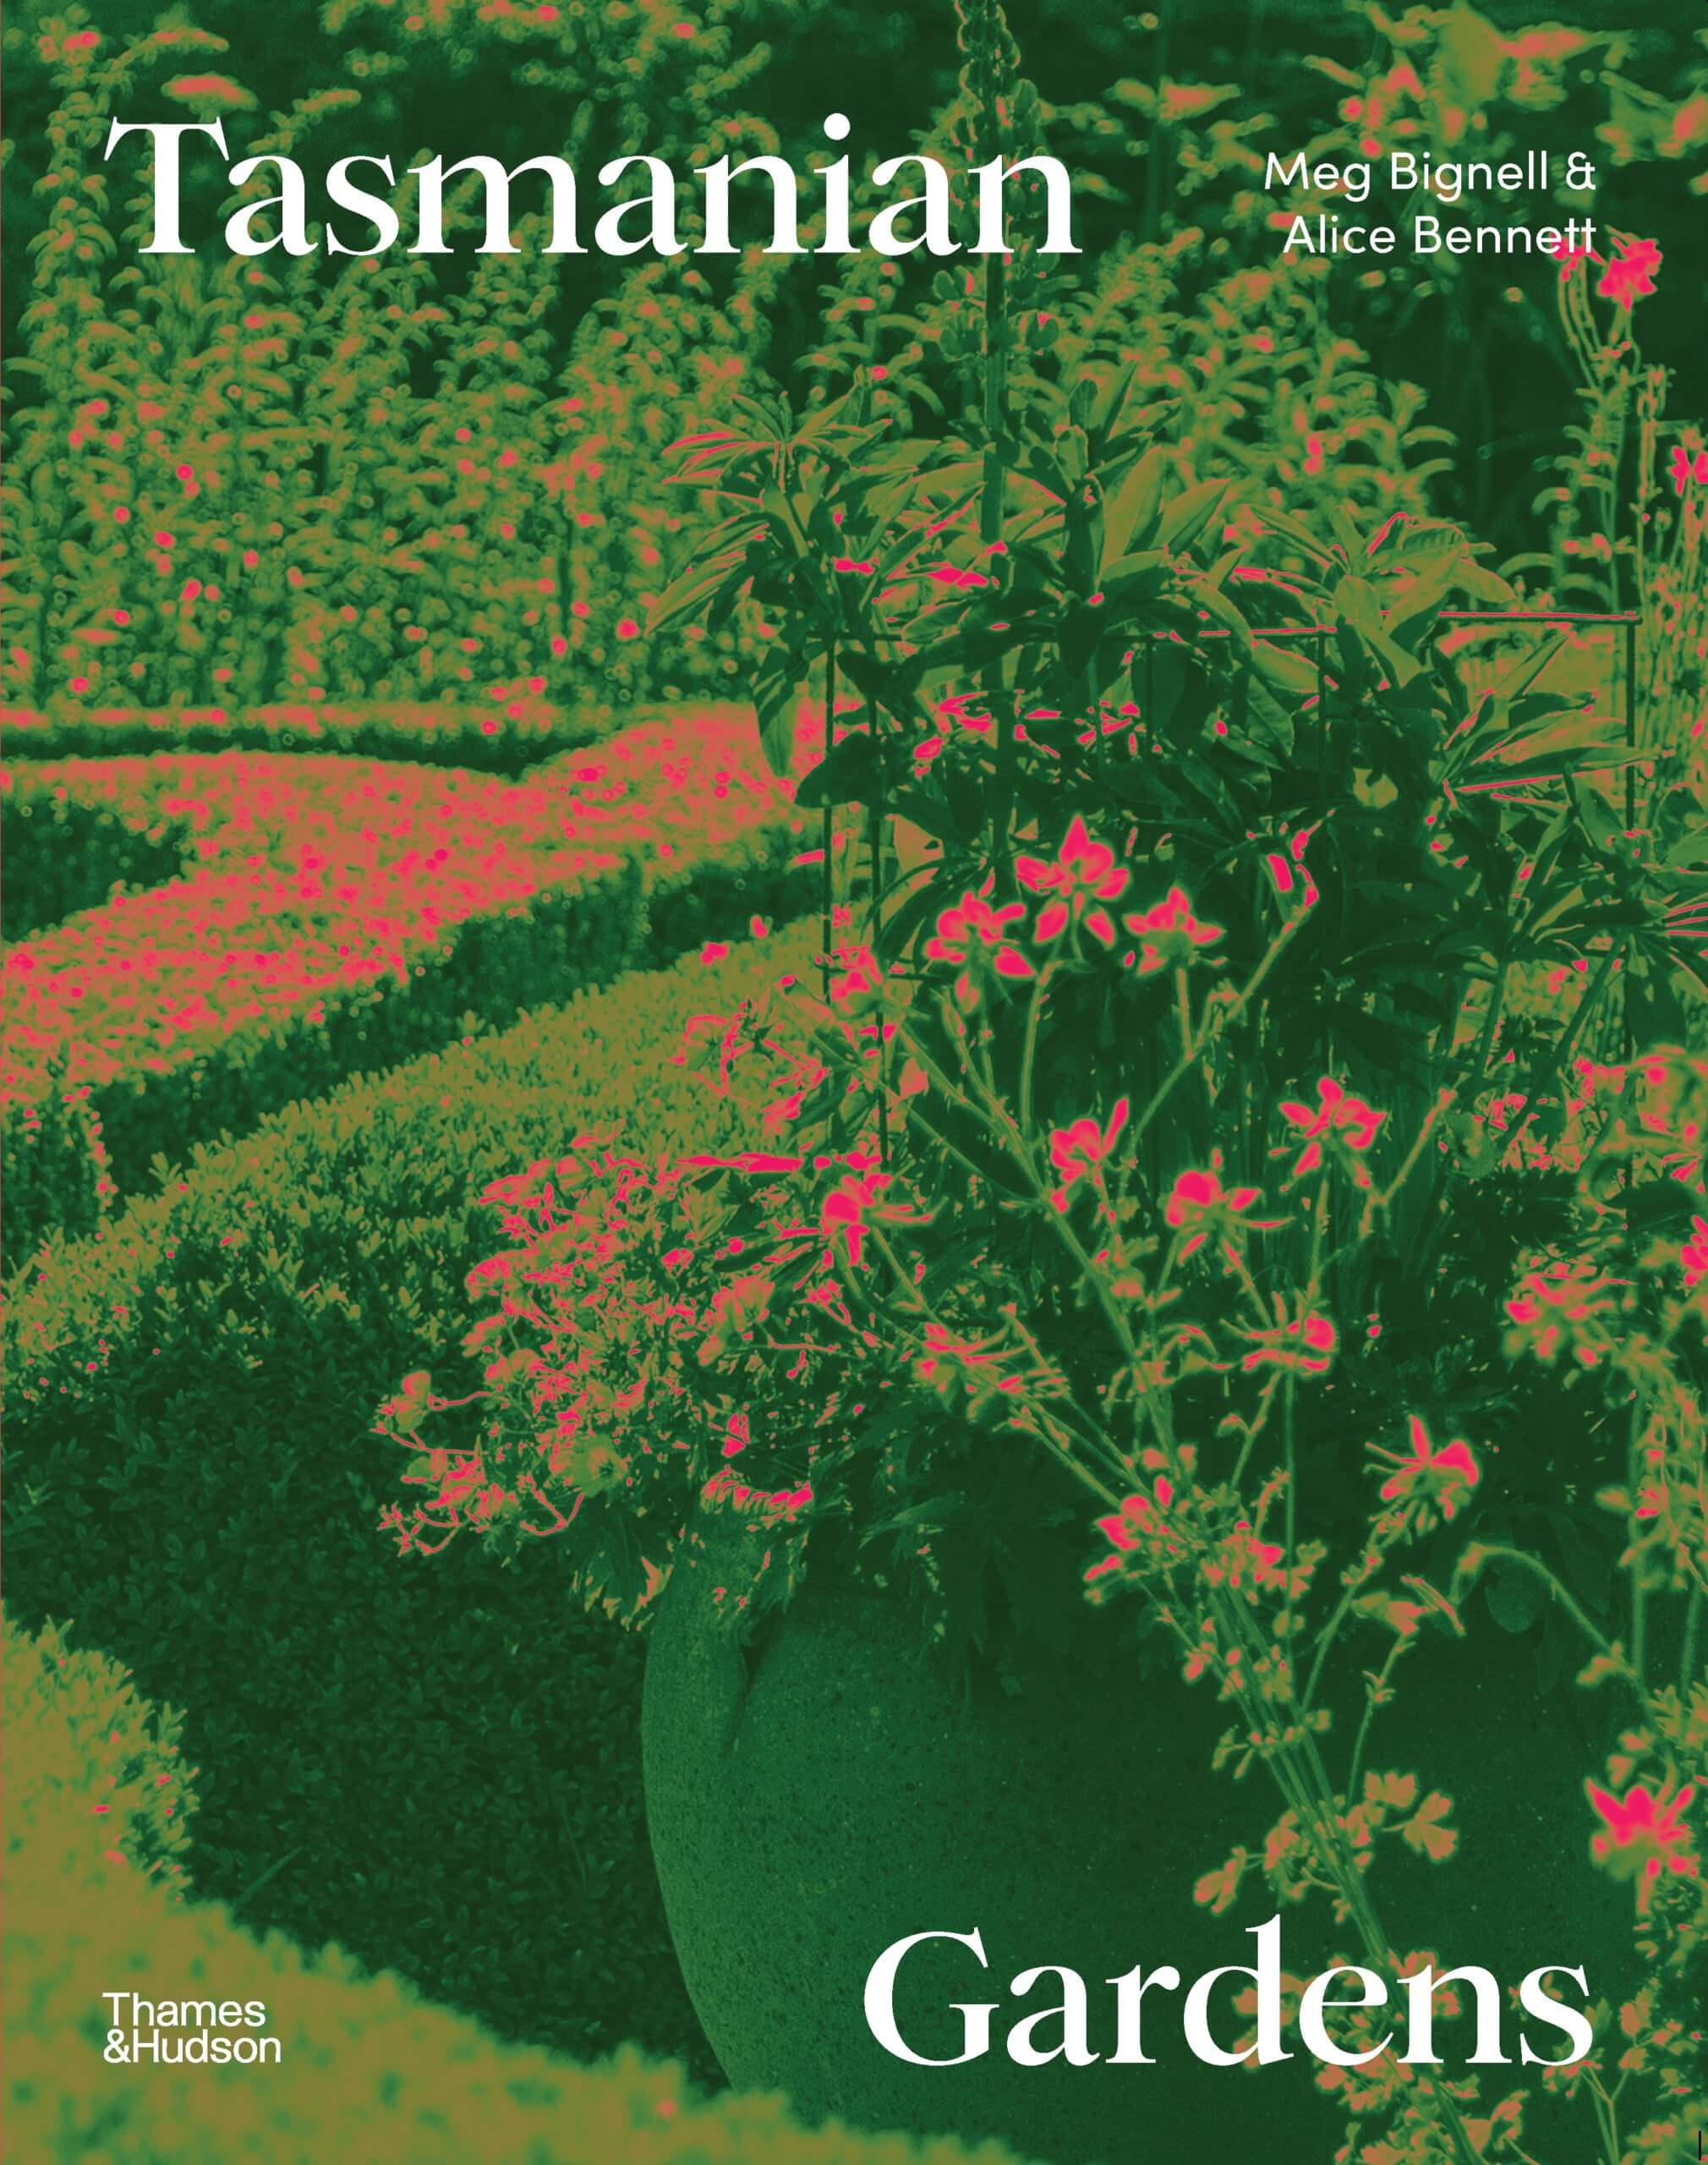 Book cover of Tasmanian Gardens, featuring an image of a lush, green garden with a tree in the foreground